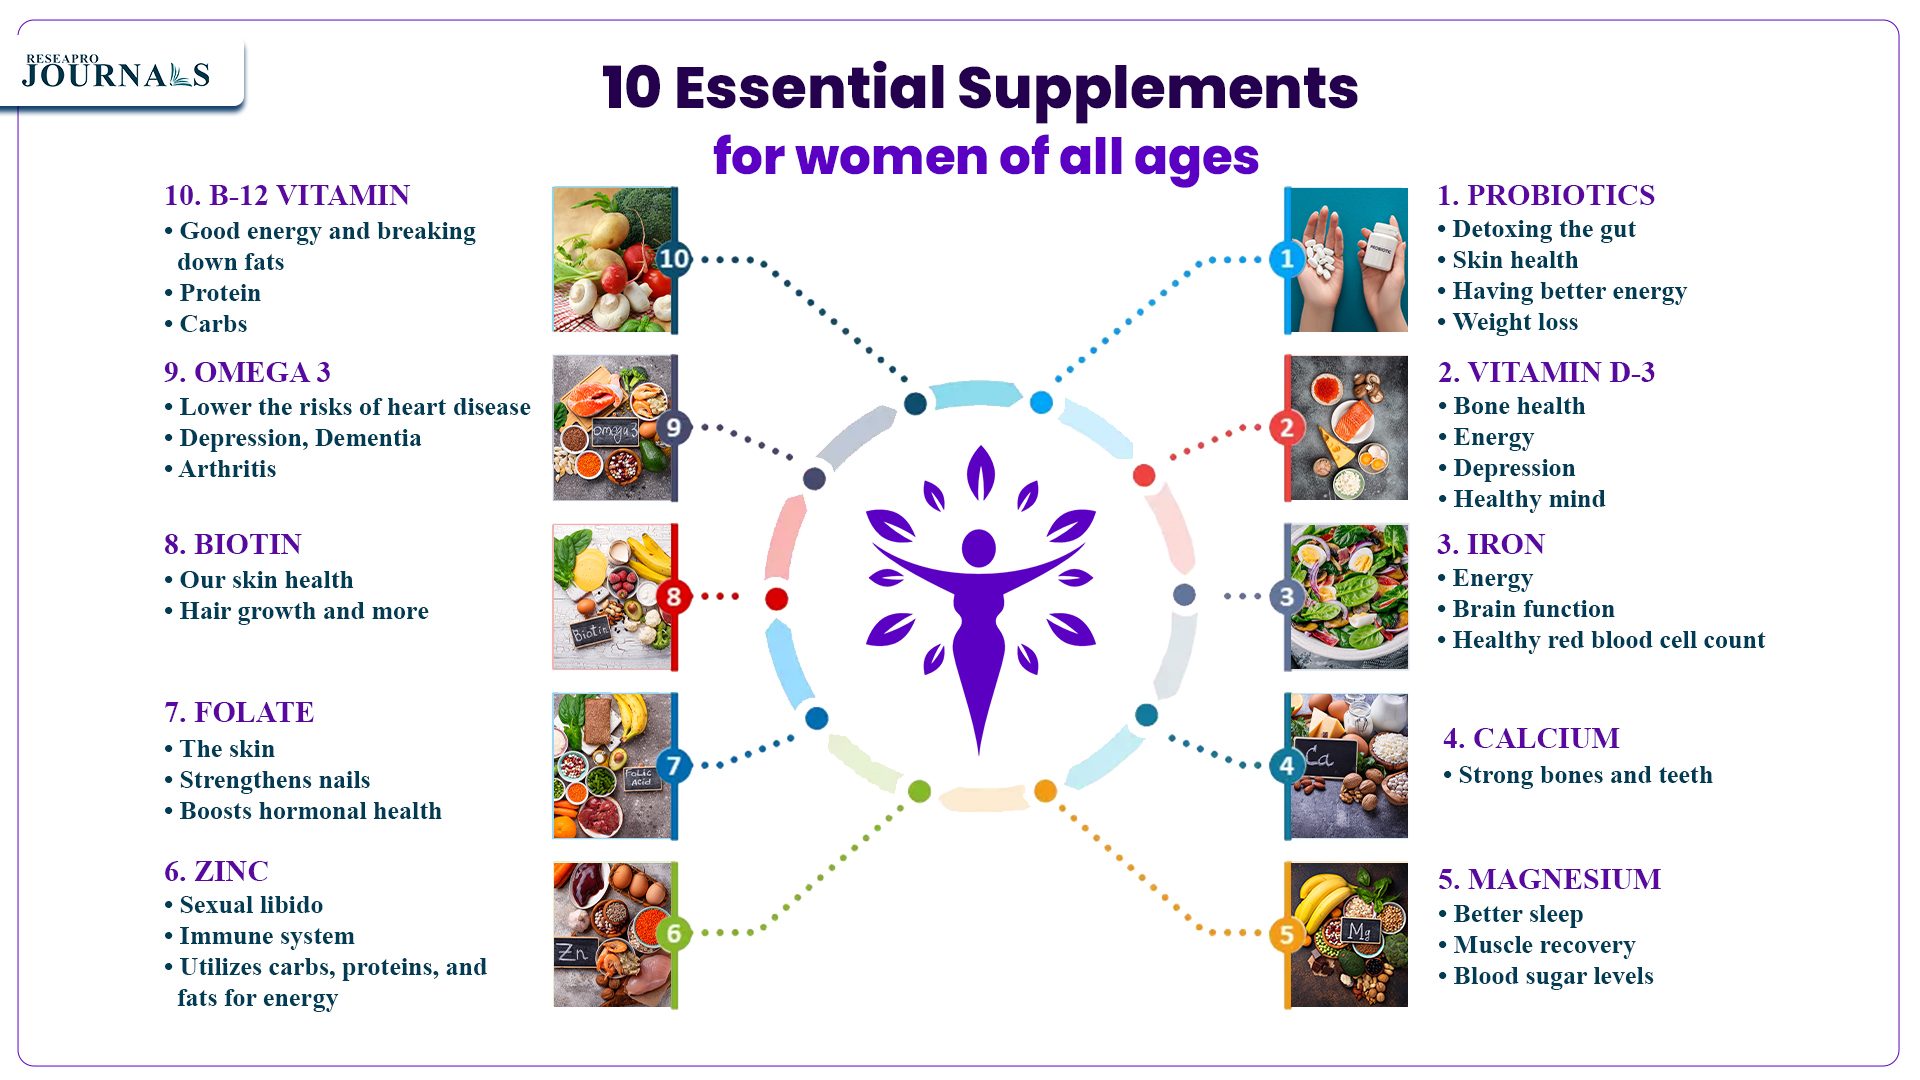 10 Essential Supplements for women of all ages